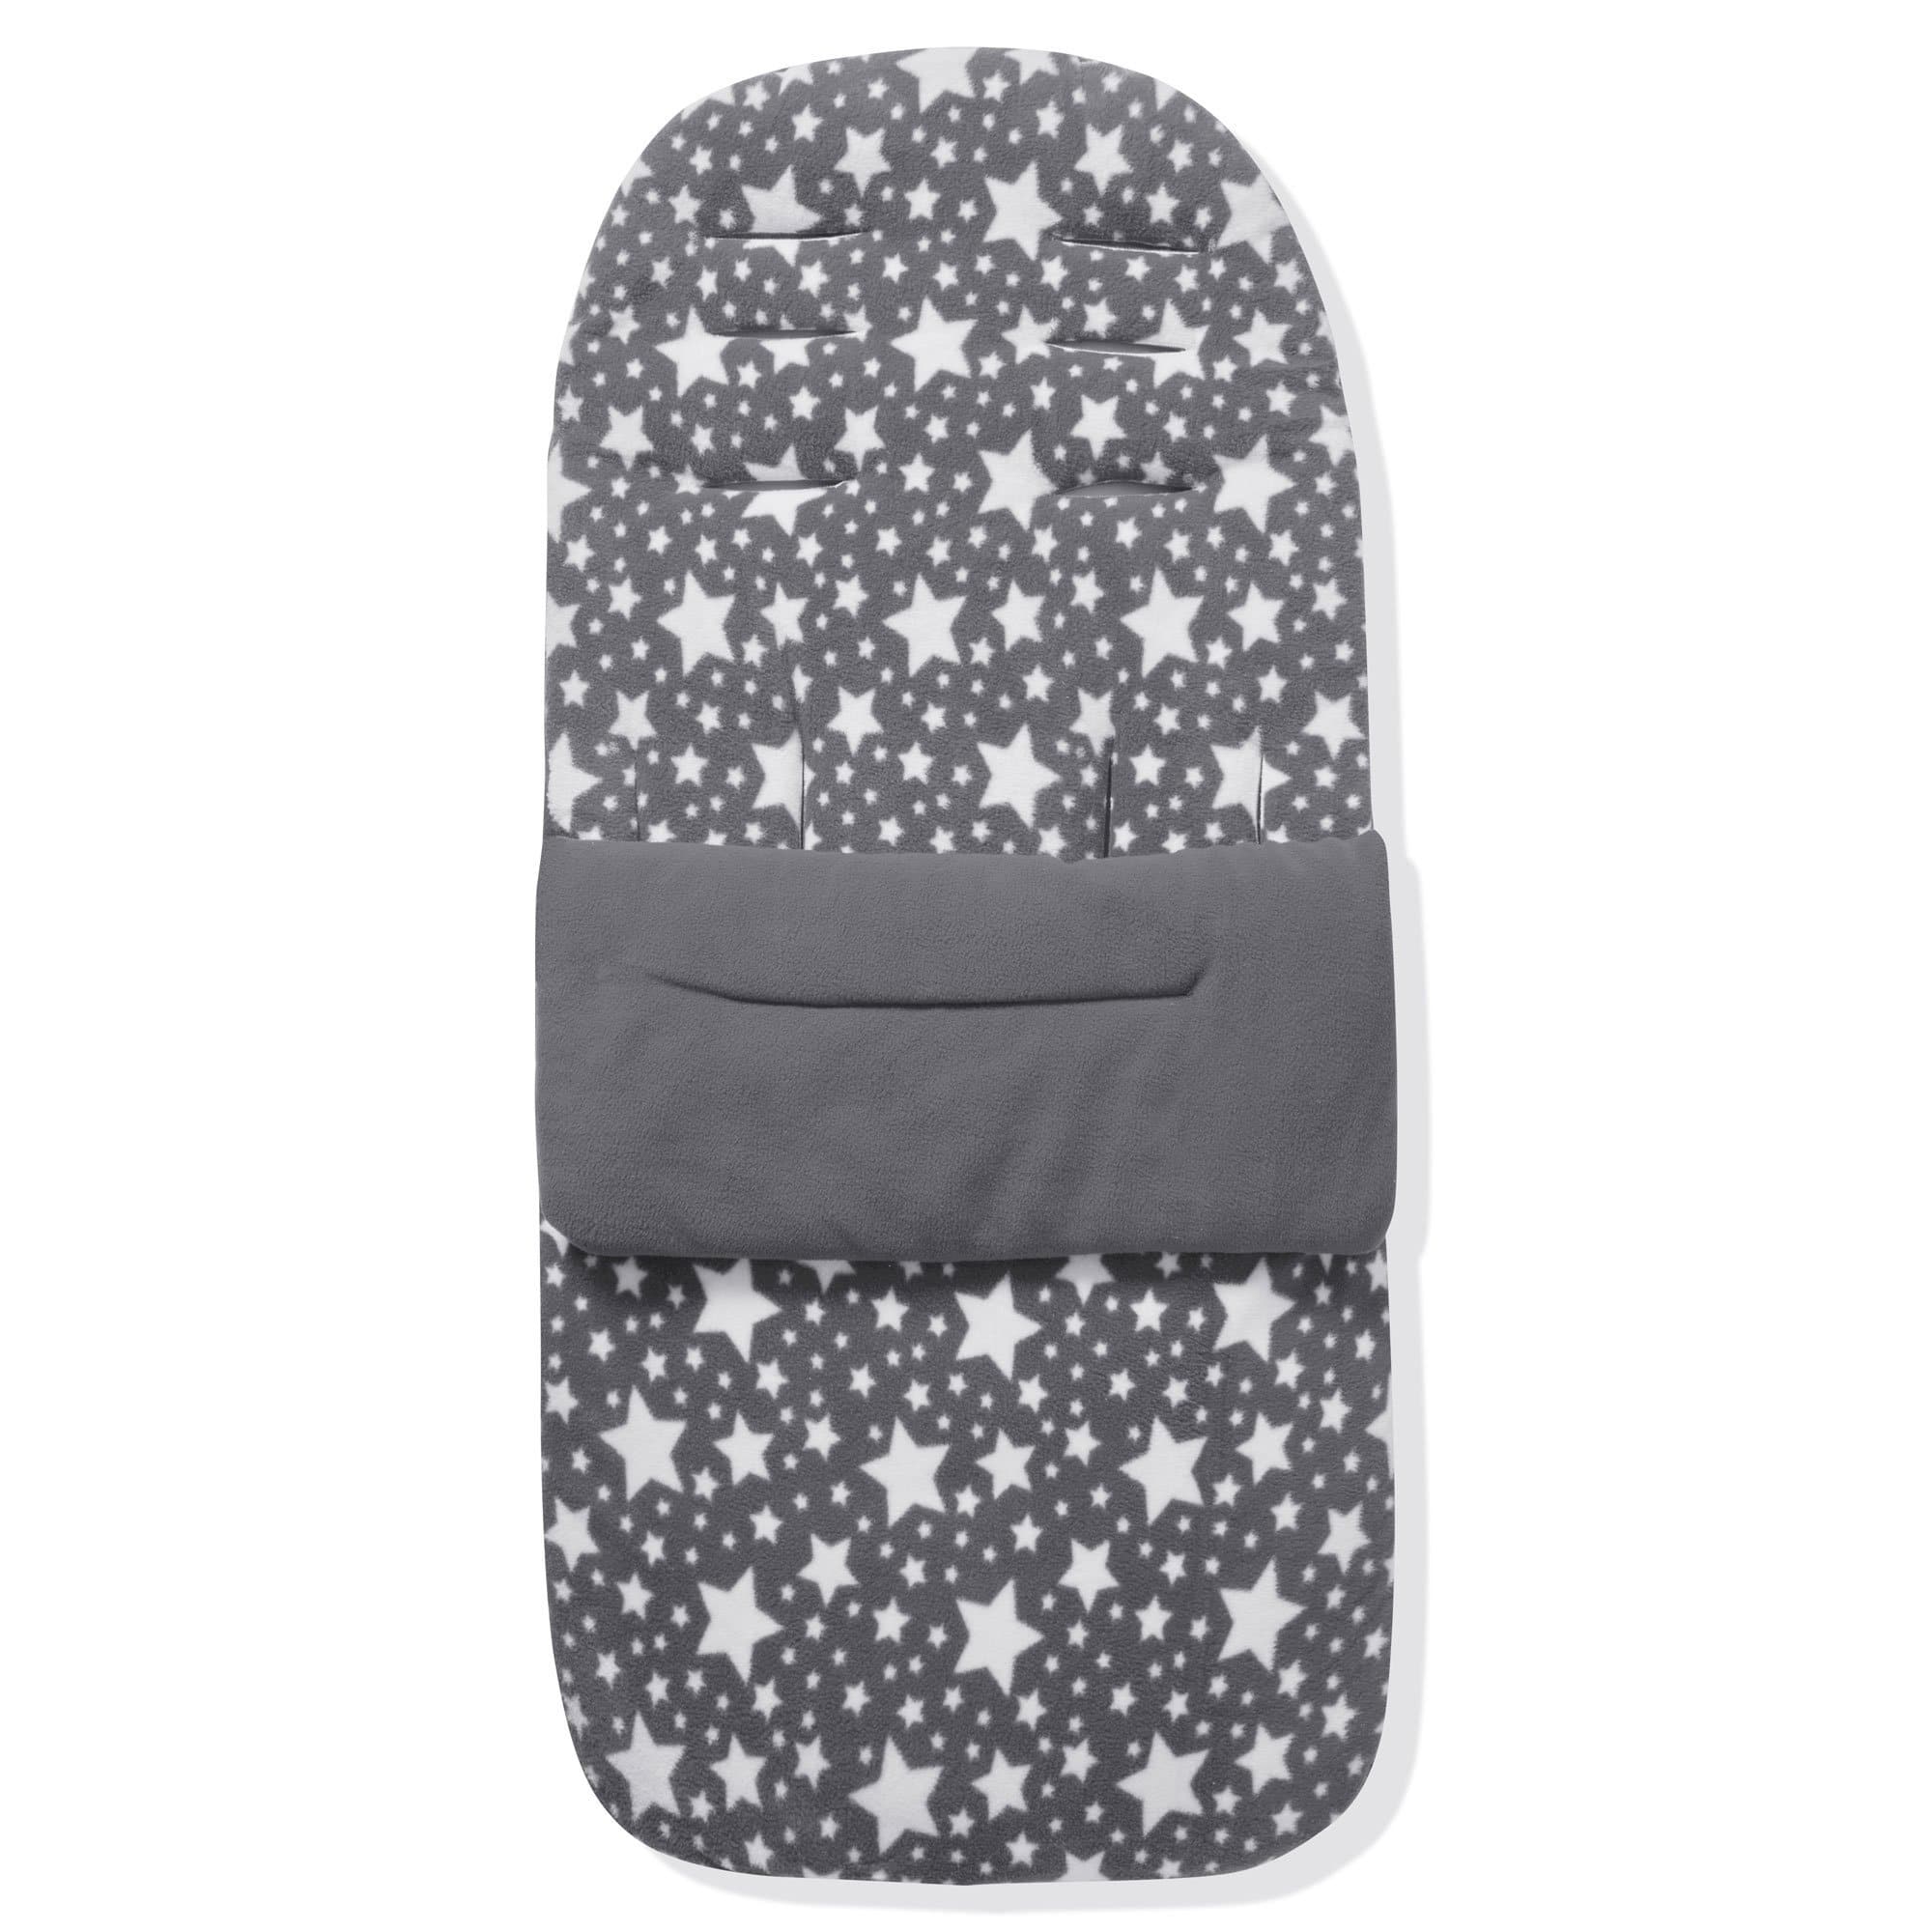 Fleece Footmuff / Cosy Toes Compatible with Hartan - For Your Little One